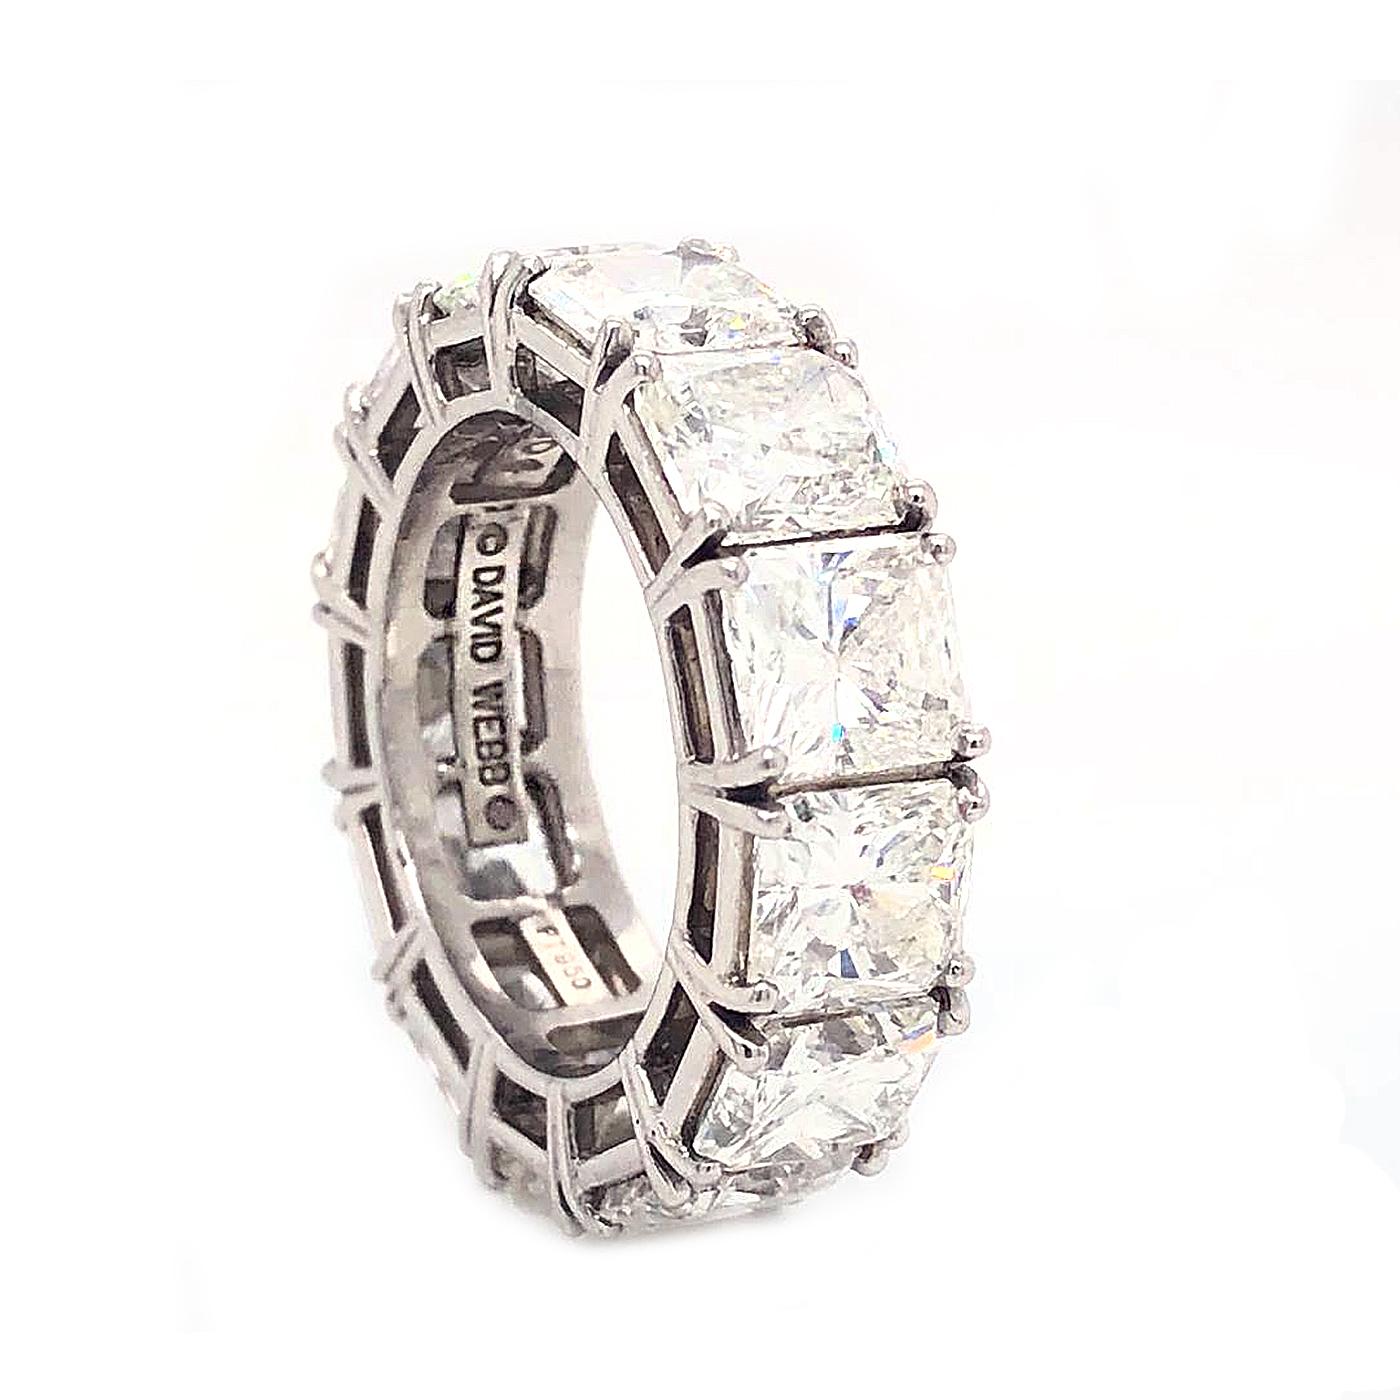 David Webb platinum eternity band is made with 13.79 carats of radiant cut diamonds. Every diamond on this band is GIA certified. This diamond wedding band is stunning the way these stones sit completely around the whole platinum